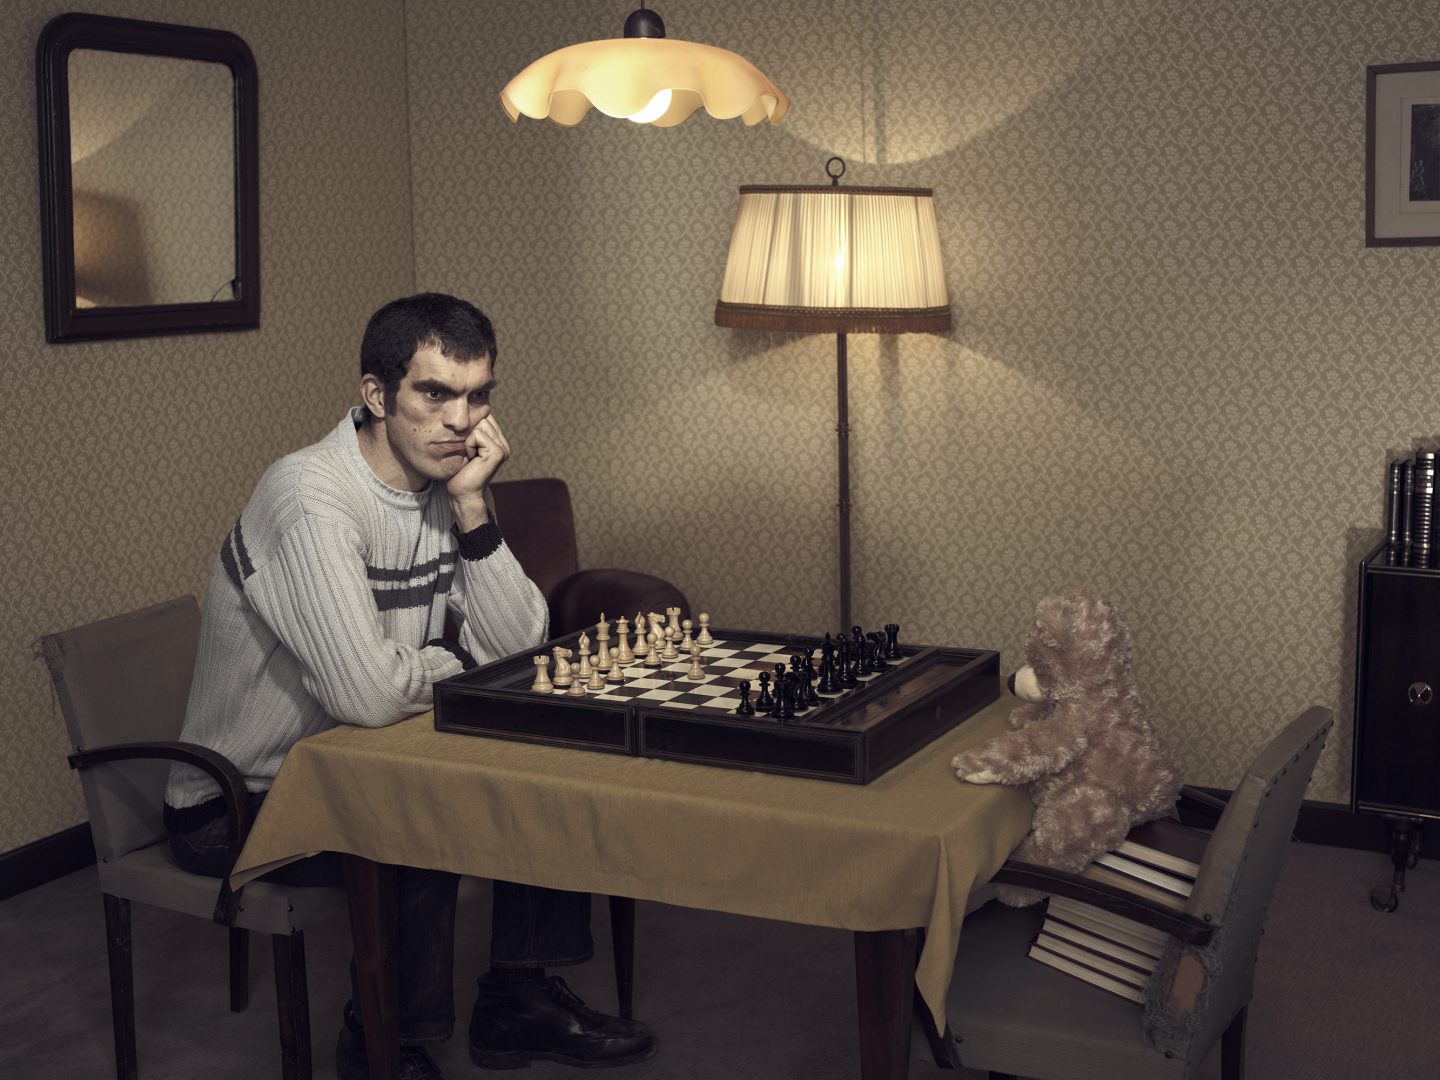 Man playing chess with teddy in room 42 by Stefan Rappo